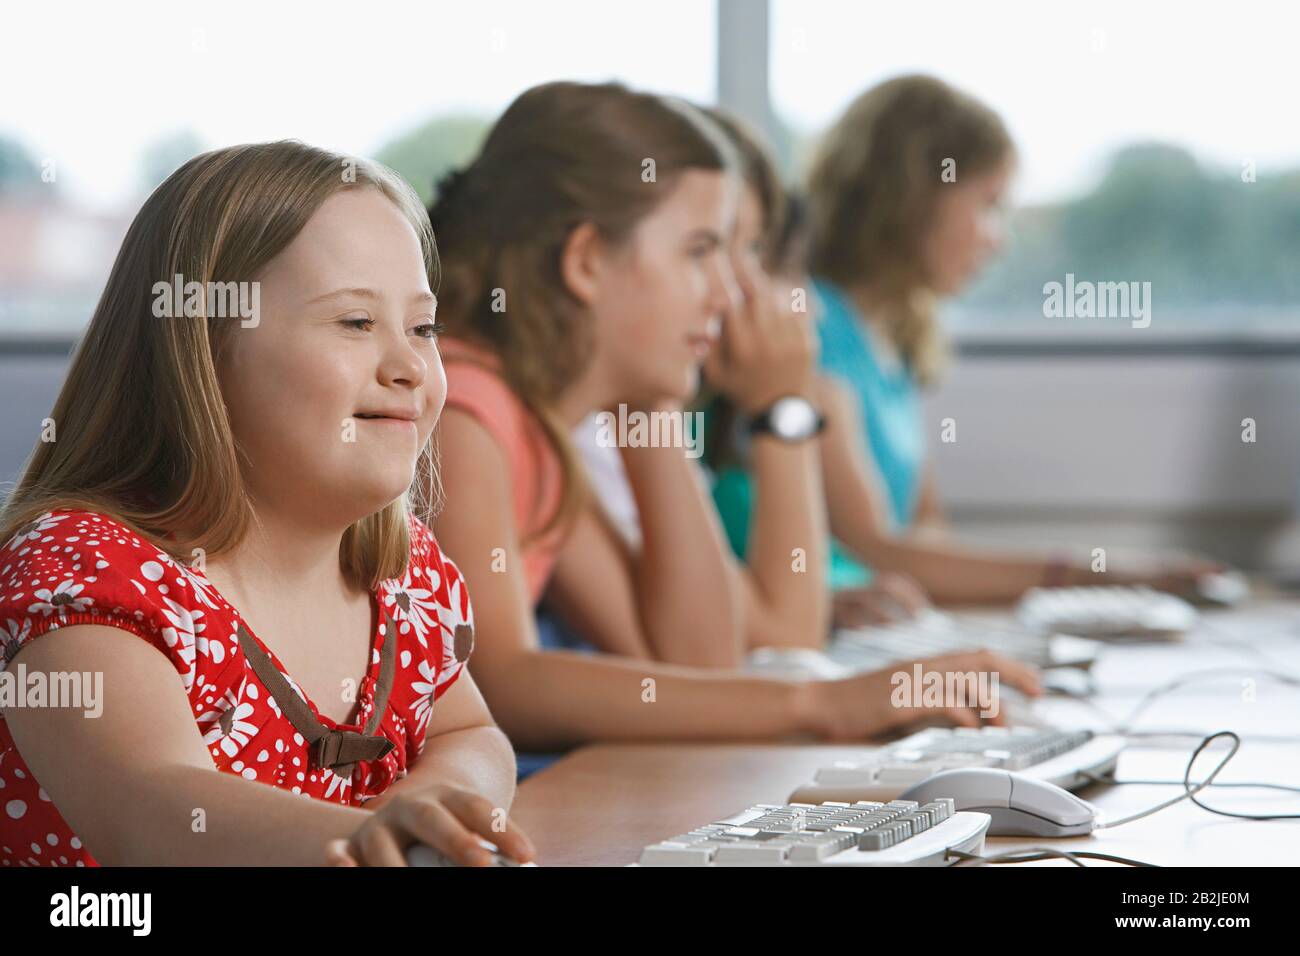 Girl (10-12) with Down syndrome using computer in computer lab children in background Stock Photo